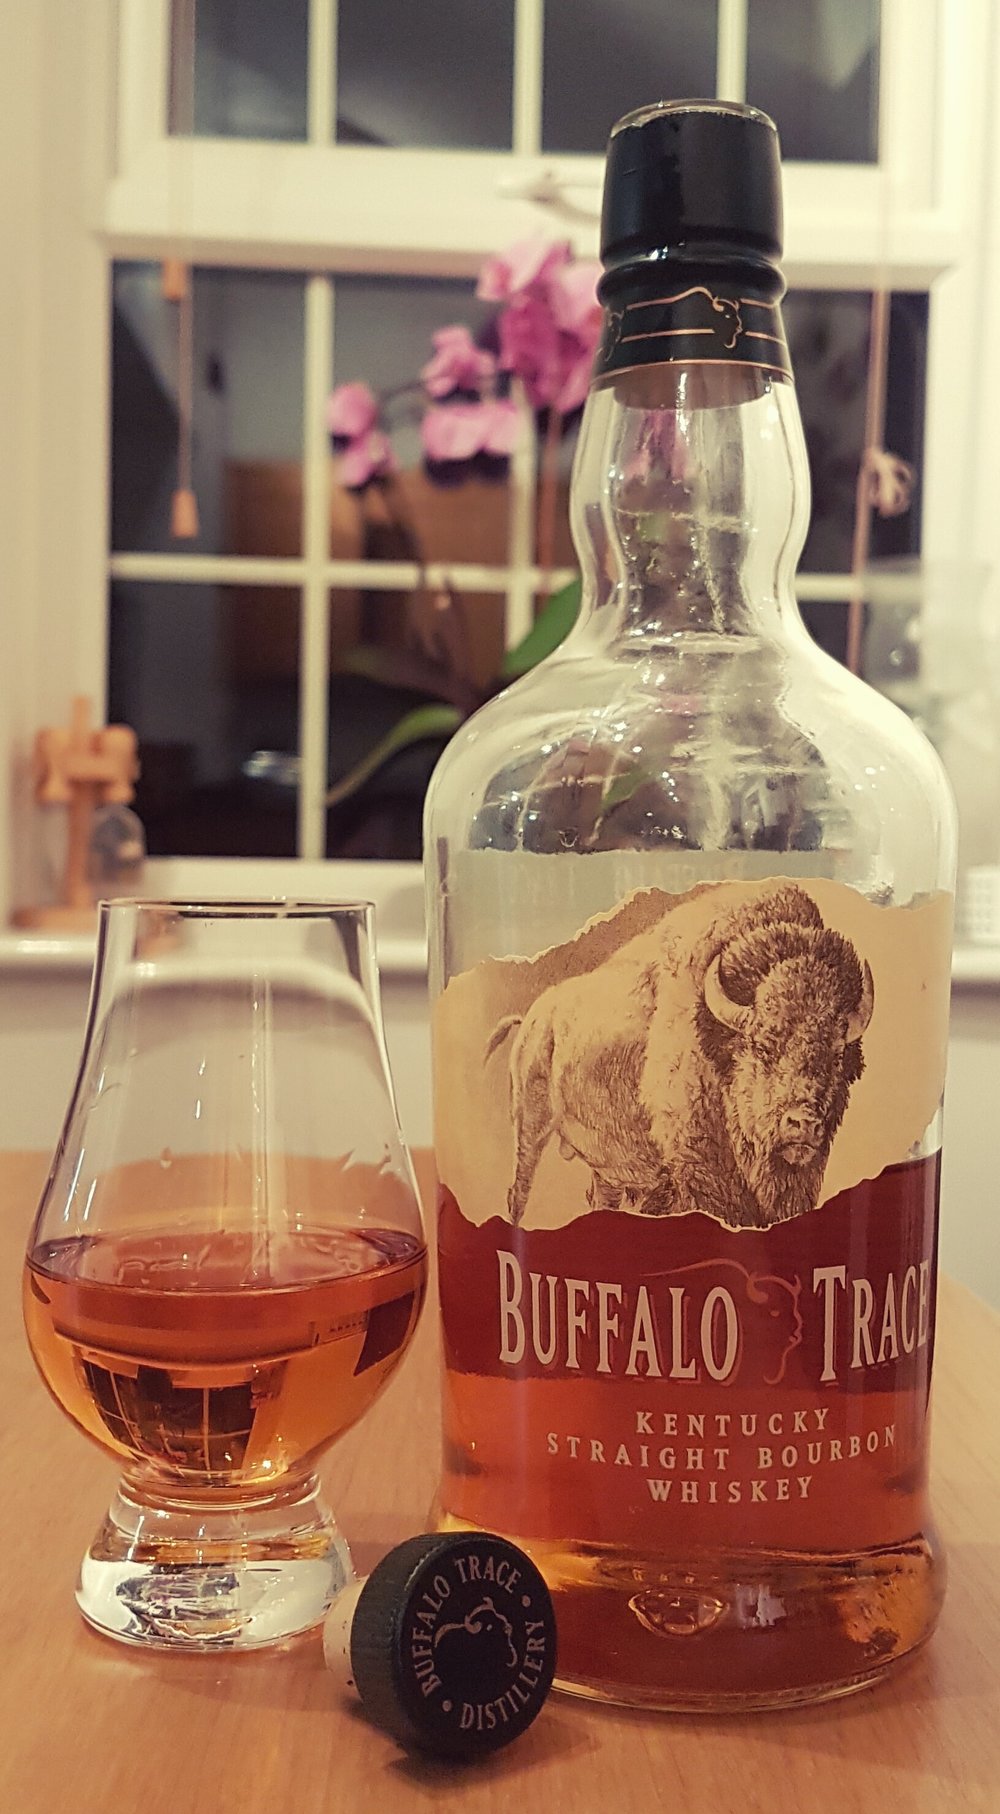 tigger Mutton Hen imod The Buffalo Trace review — Bourbon Gents